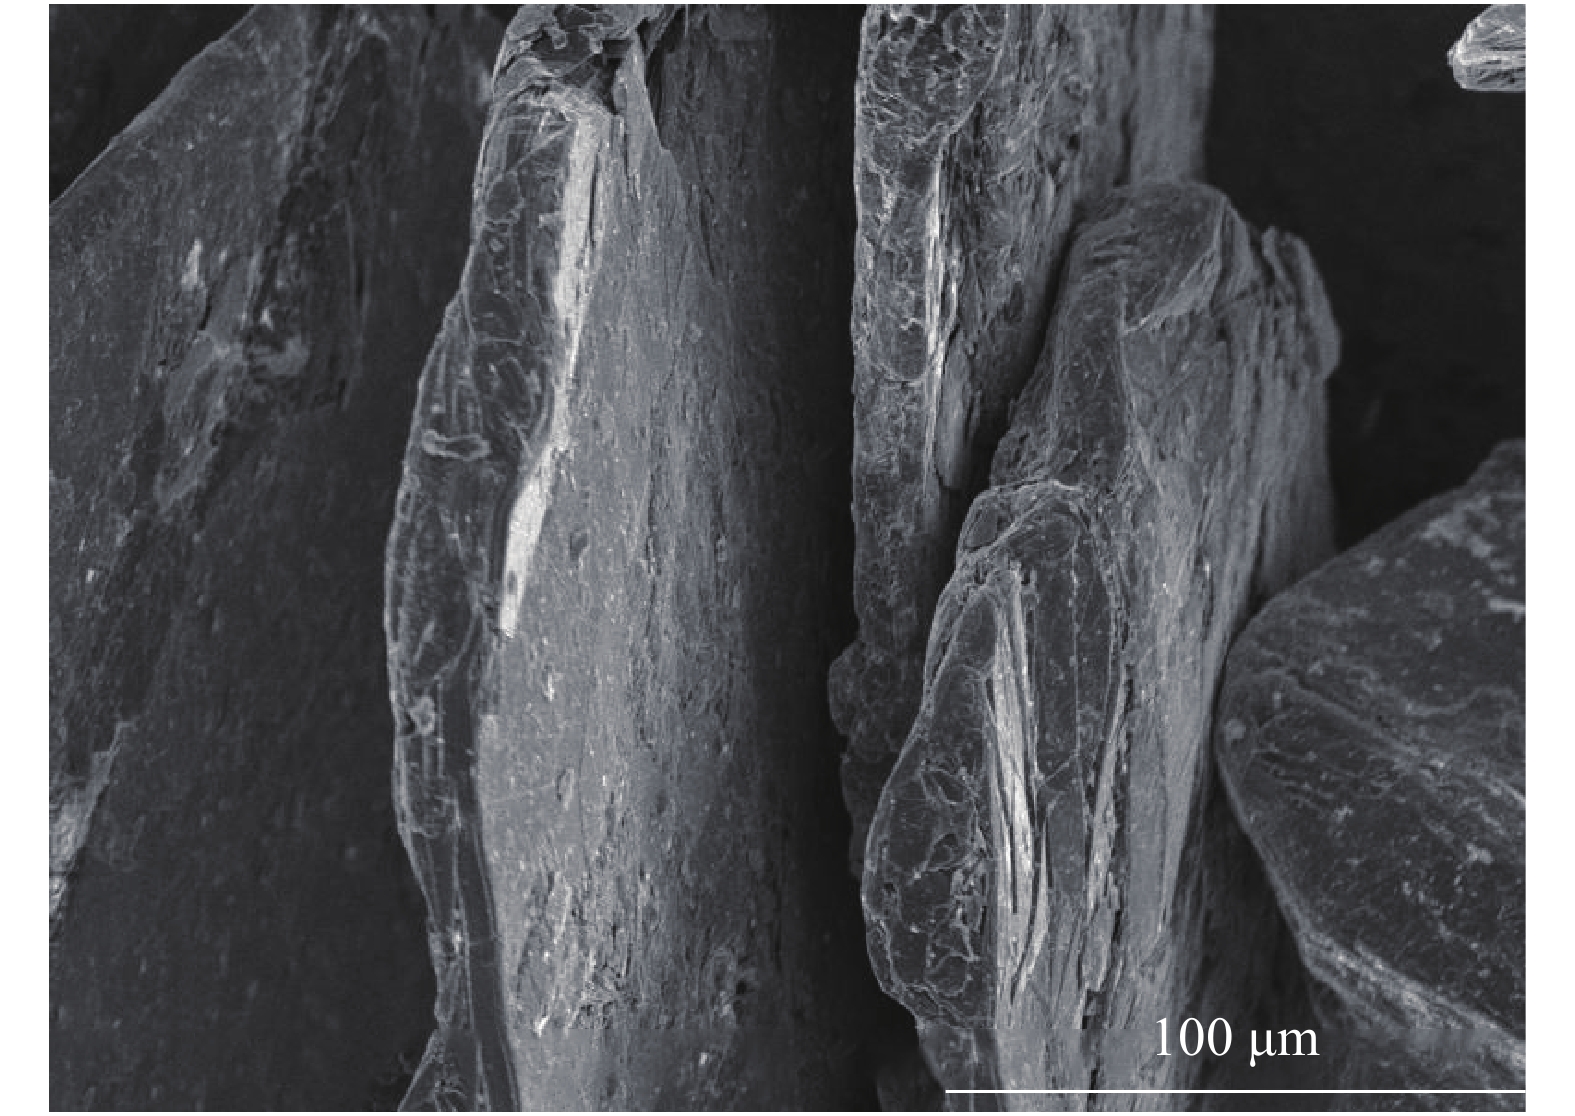 Scanning electron micrograph of flaky graphite samples from Jixi